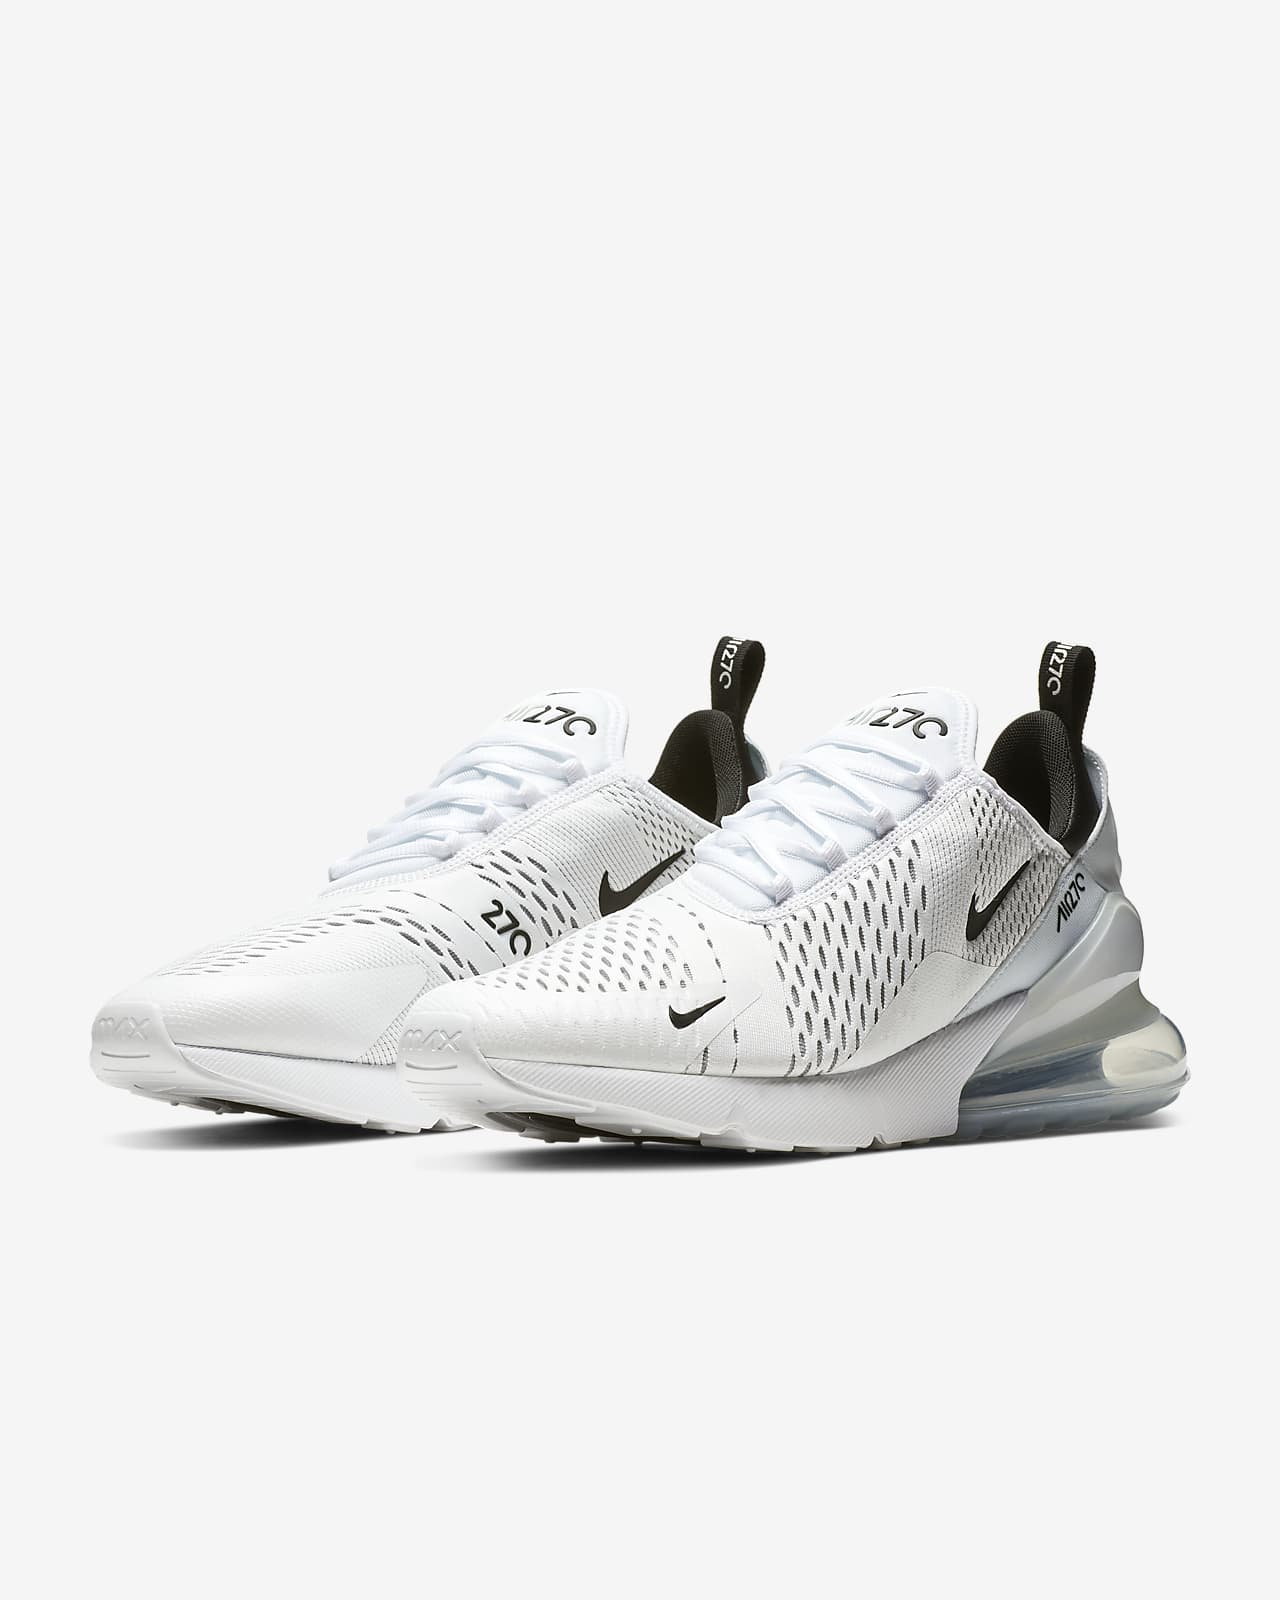 size 7 men's nike air max 270 shoes